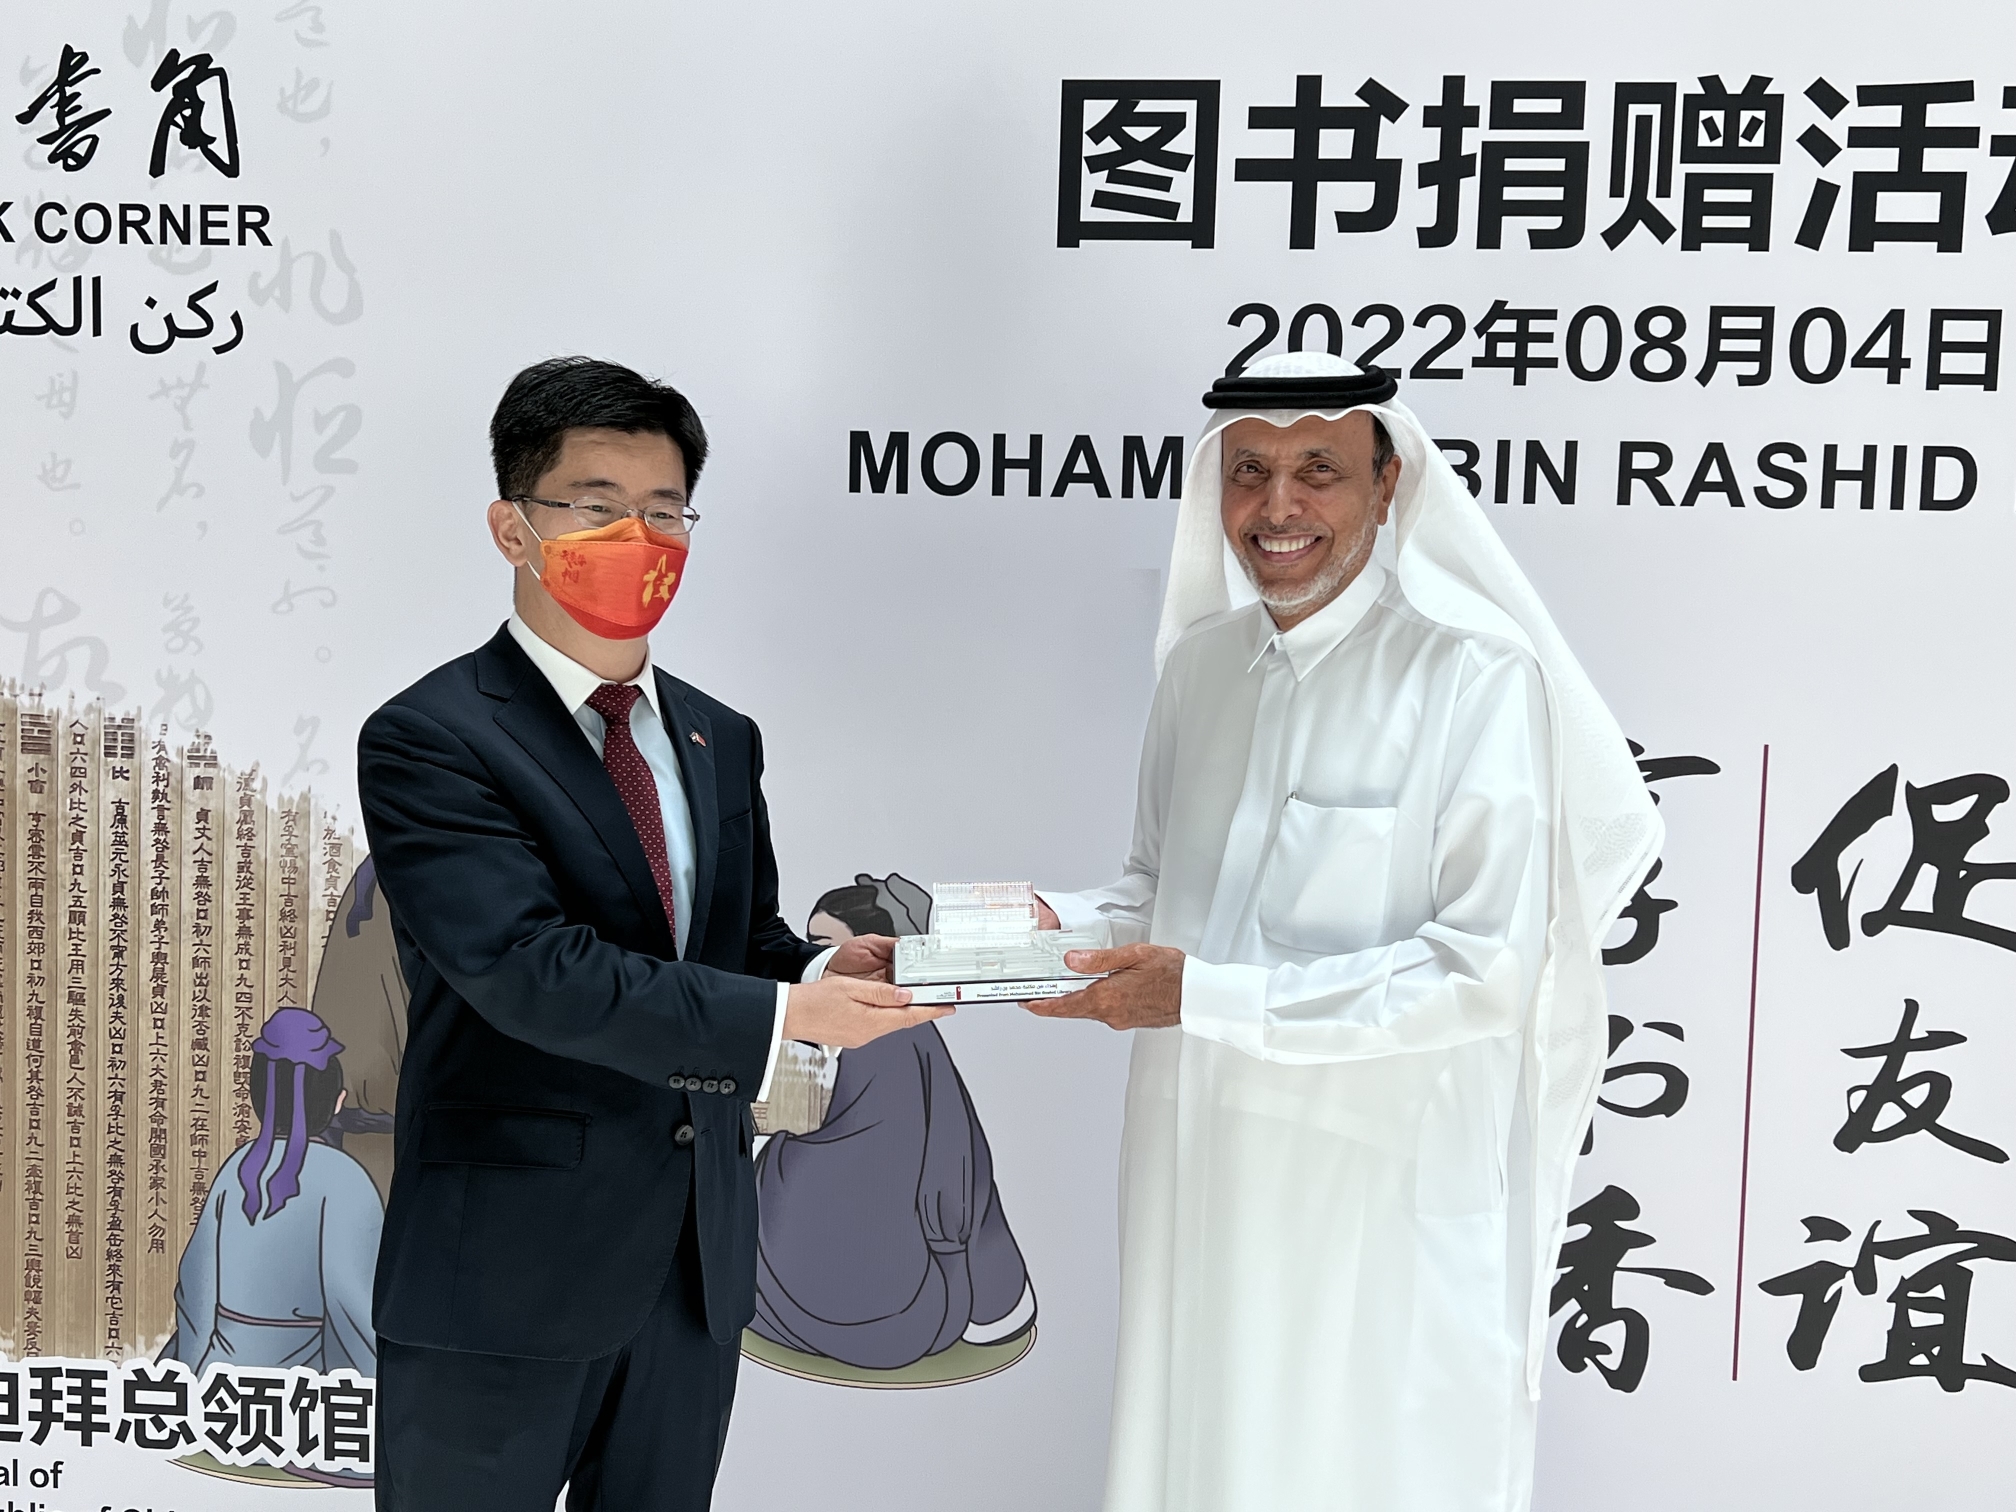 China Consulate VIP delegation visits Mohammed Bin Rashid Library with a gift of 1000 books